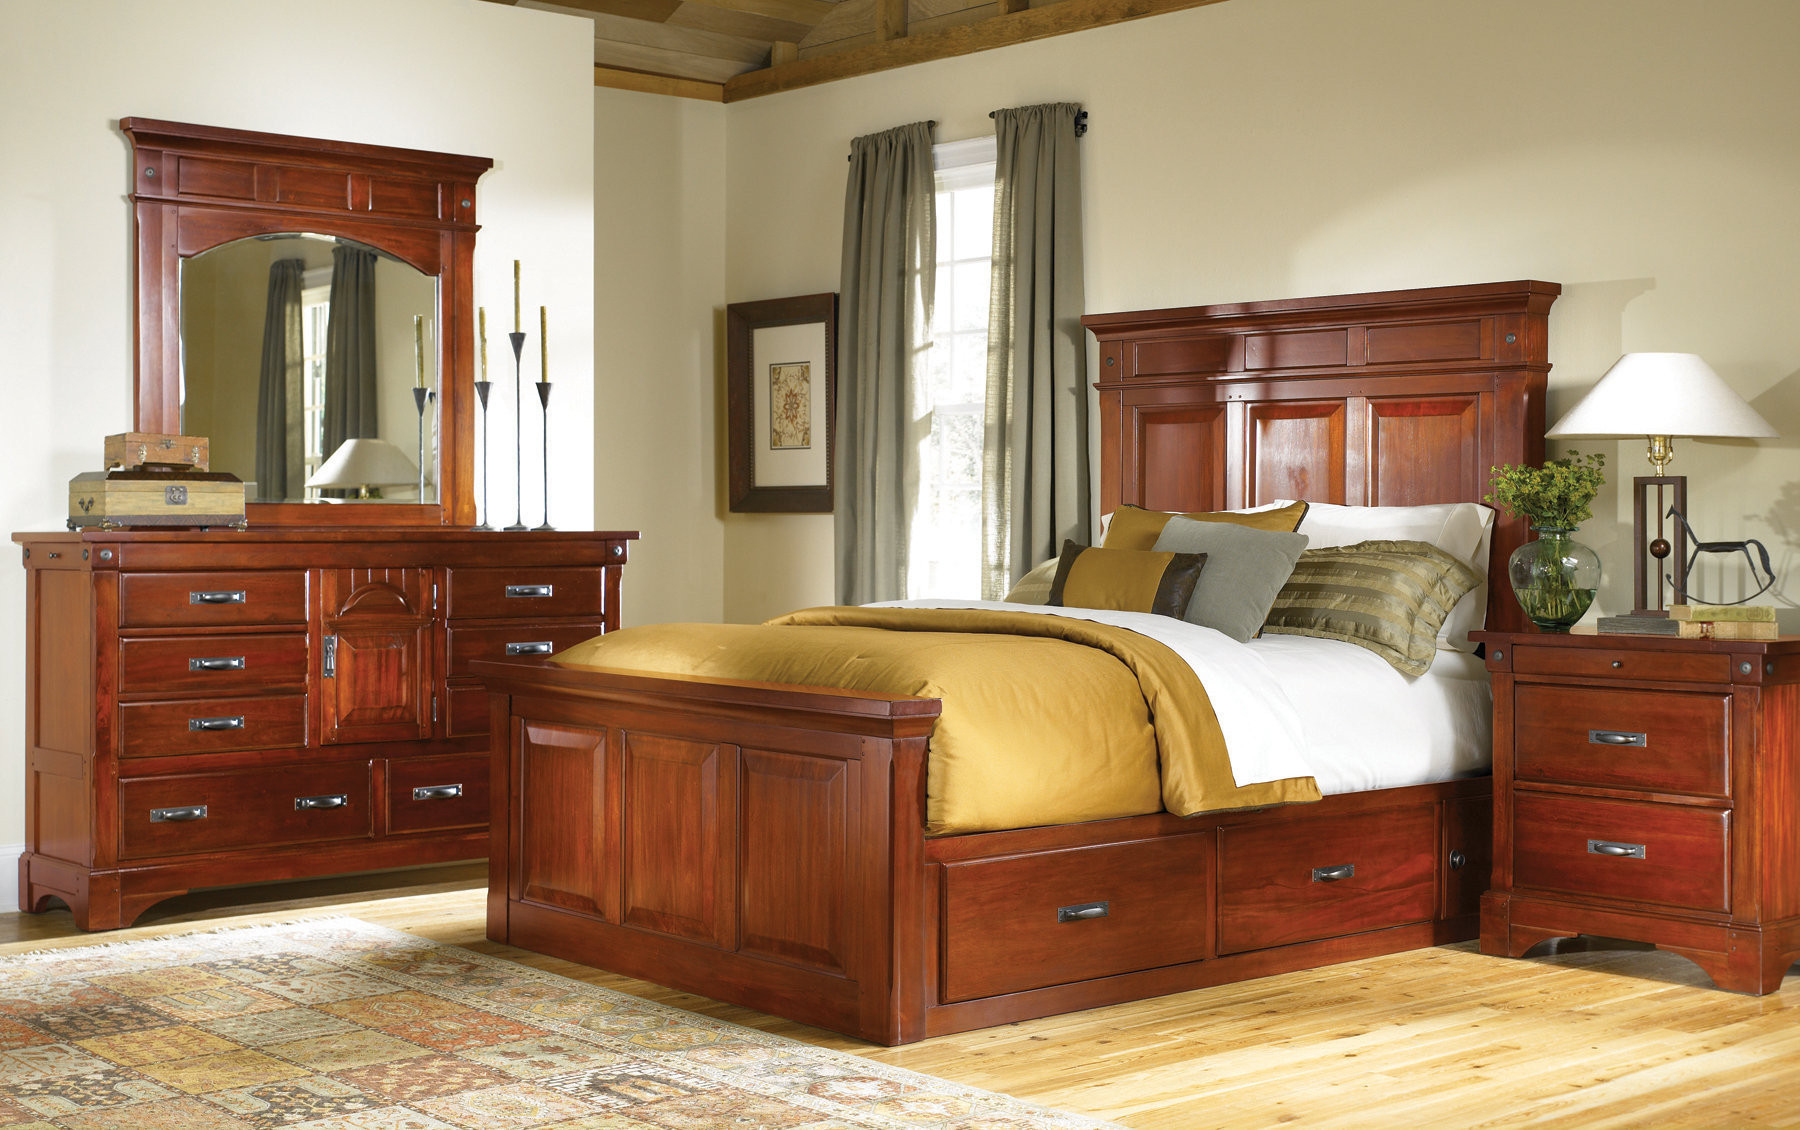 Storage Bedroom Furniture
 Mahogany Storage Bed Classic King and Queen Solid Wood